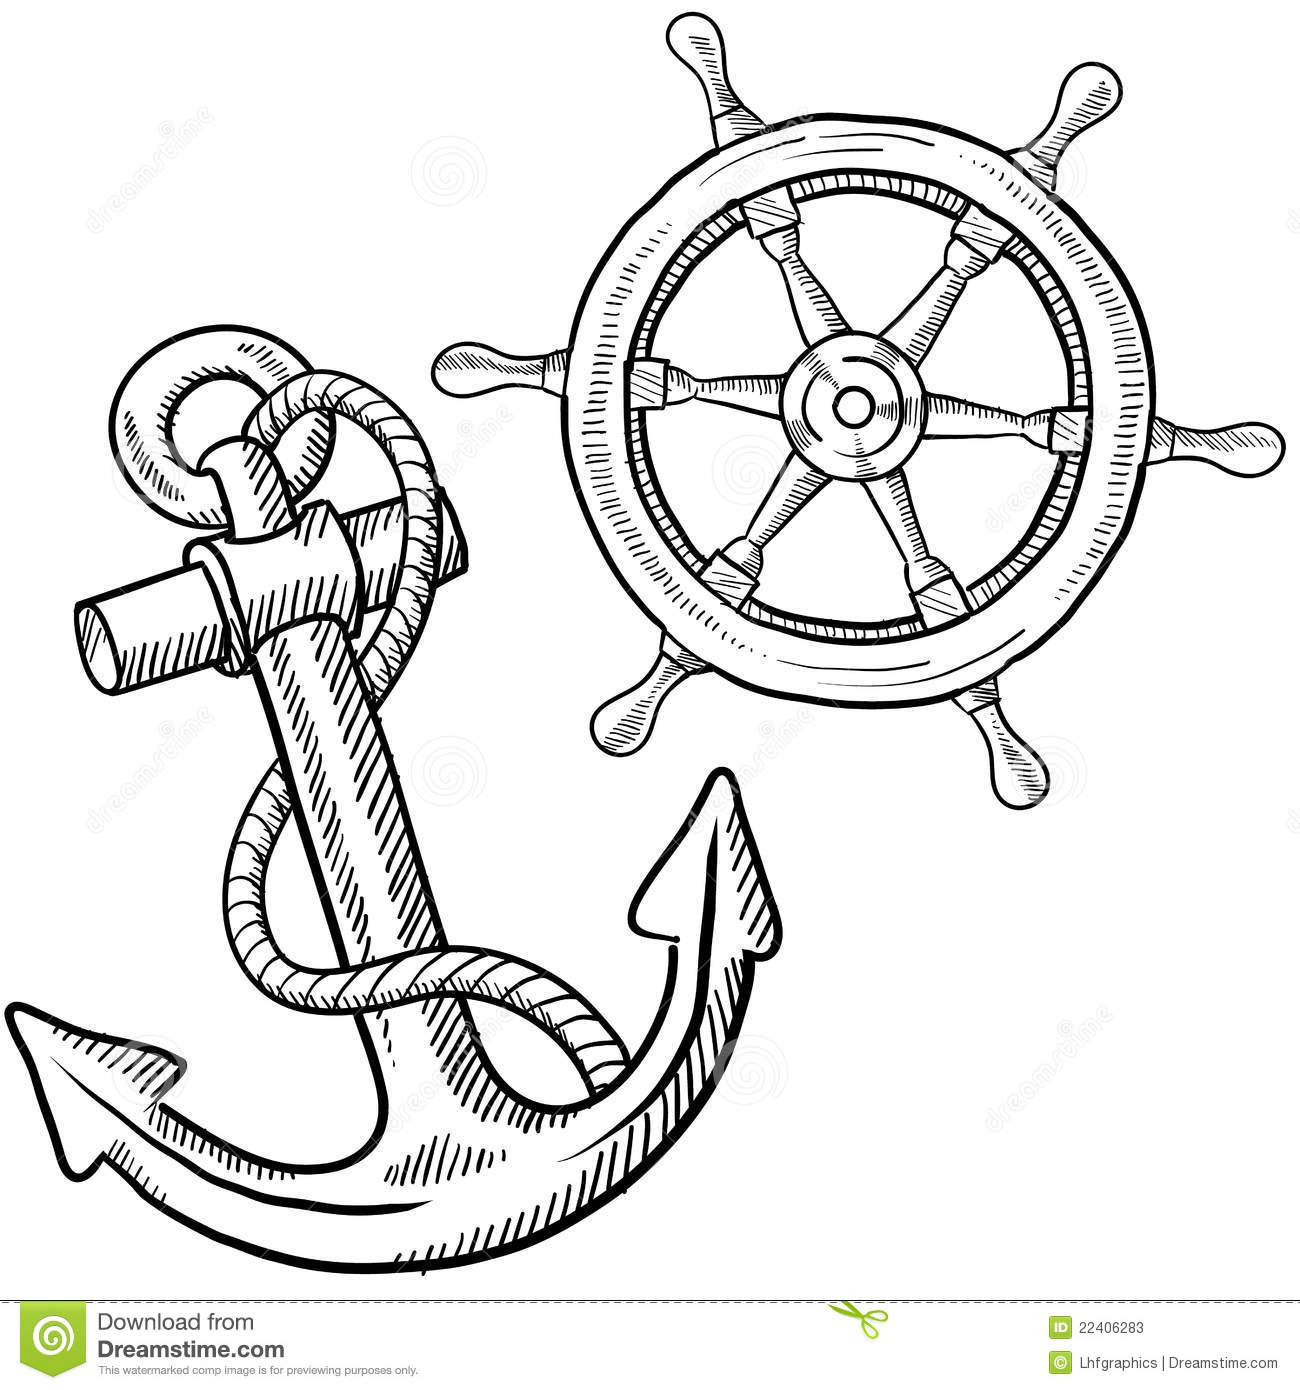 Doodle Style Ships Anchor And Wheel Illustration In Vector Format